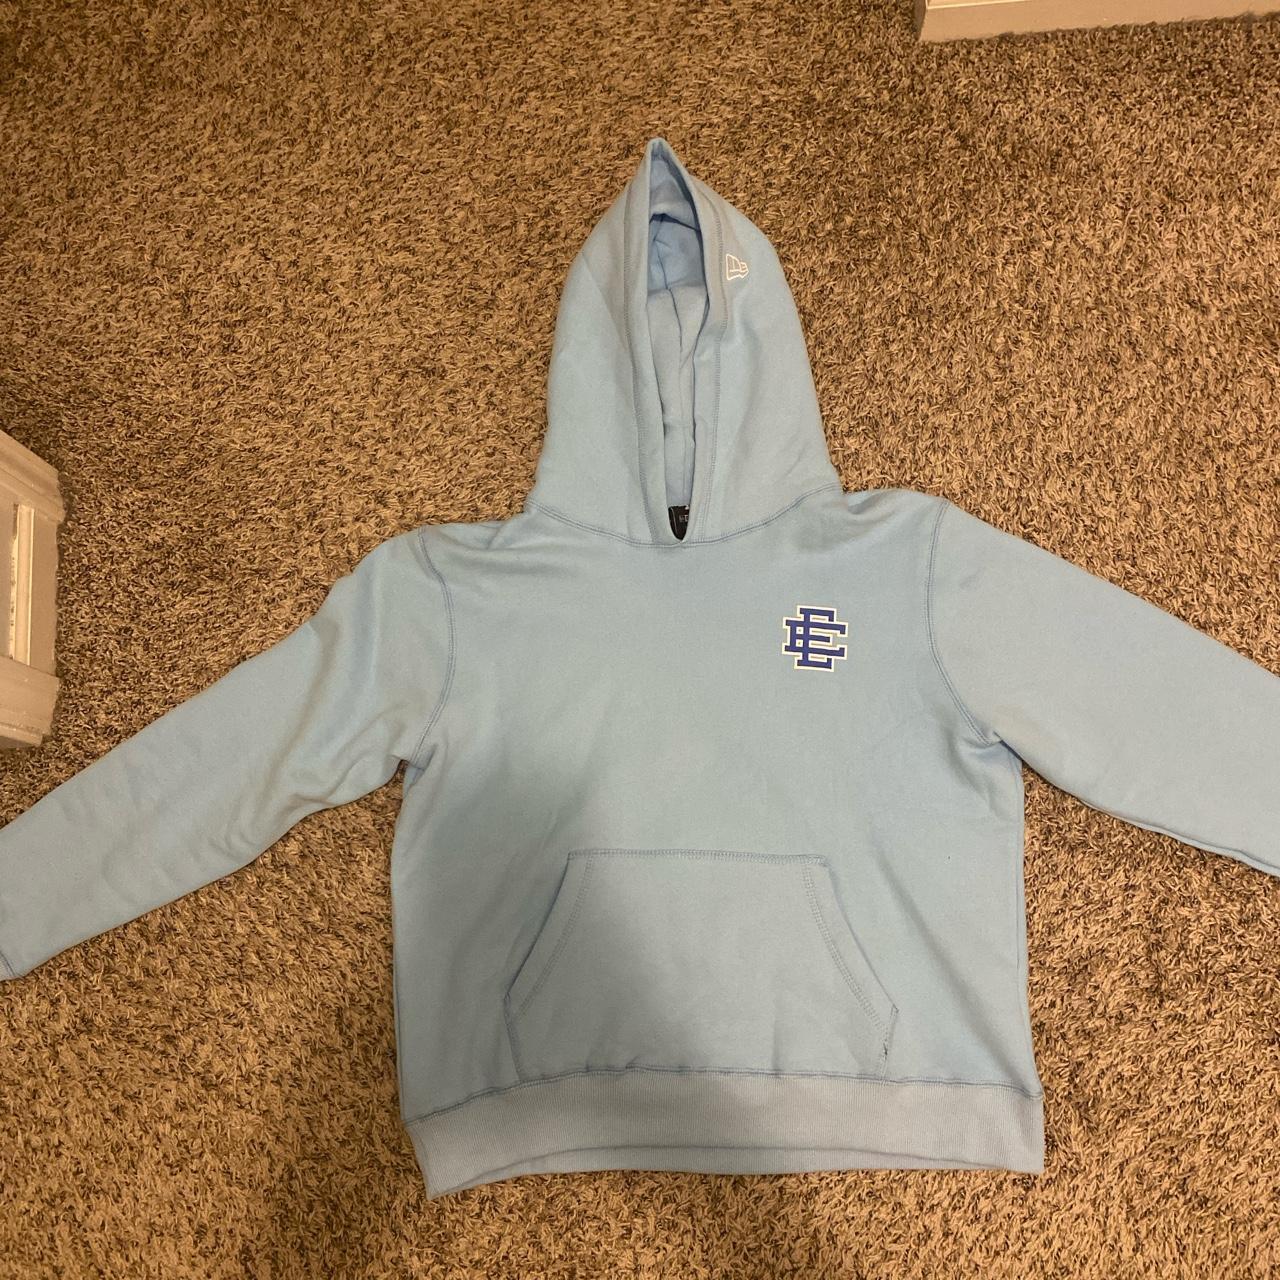 Where can I cop some Eric Emanuel Hoodies // EE Hoodie like these